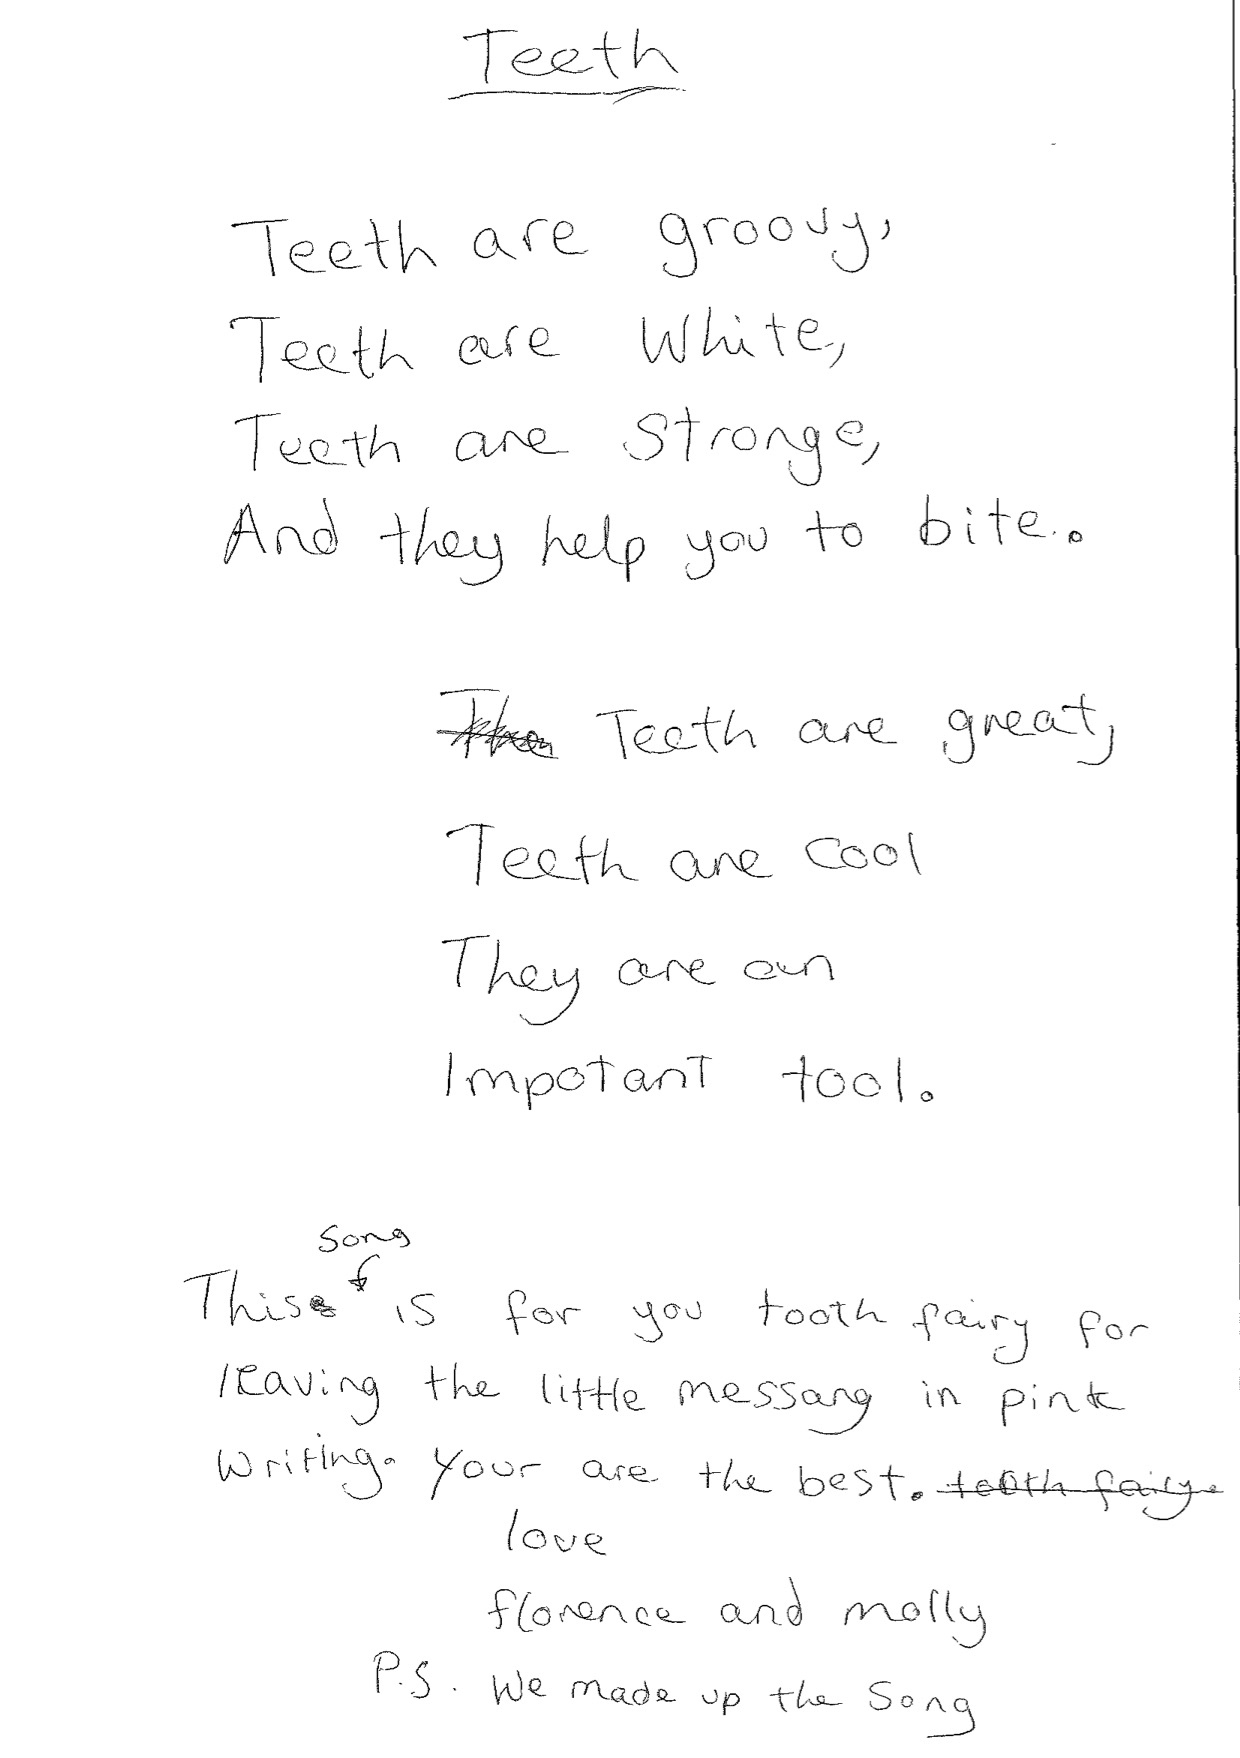 Song. Reads:
Teeth are groovy,
Teeth are white,
Teeth are strong,
And they help you to bite.

Teeth are great,
Teeth are cool,
They are an
important tool.

Message. Reads: This song is for you, Tooth Fairy, for leaving the little message in pink writing. You are the best. Love, Florence and Molly. P.S We made up the song.

Song and message written in pencil on white paper.
